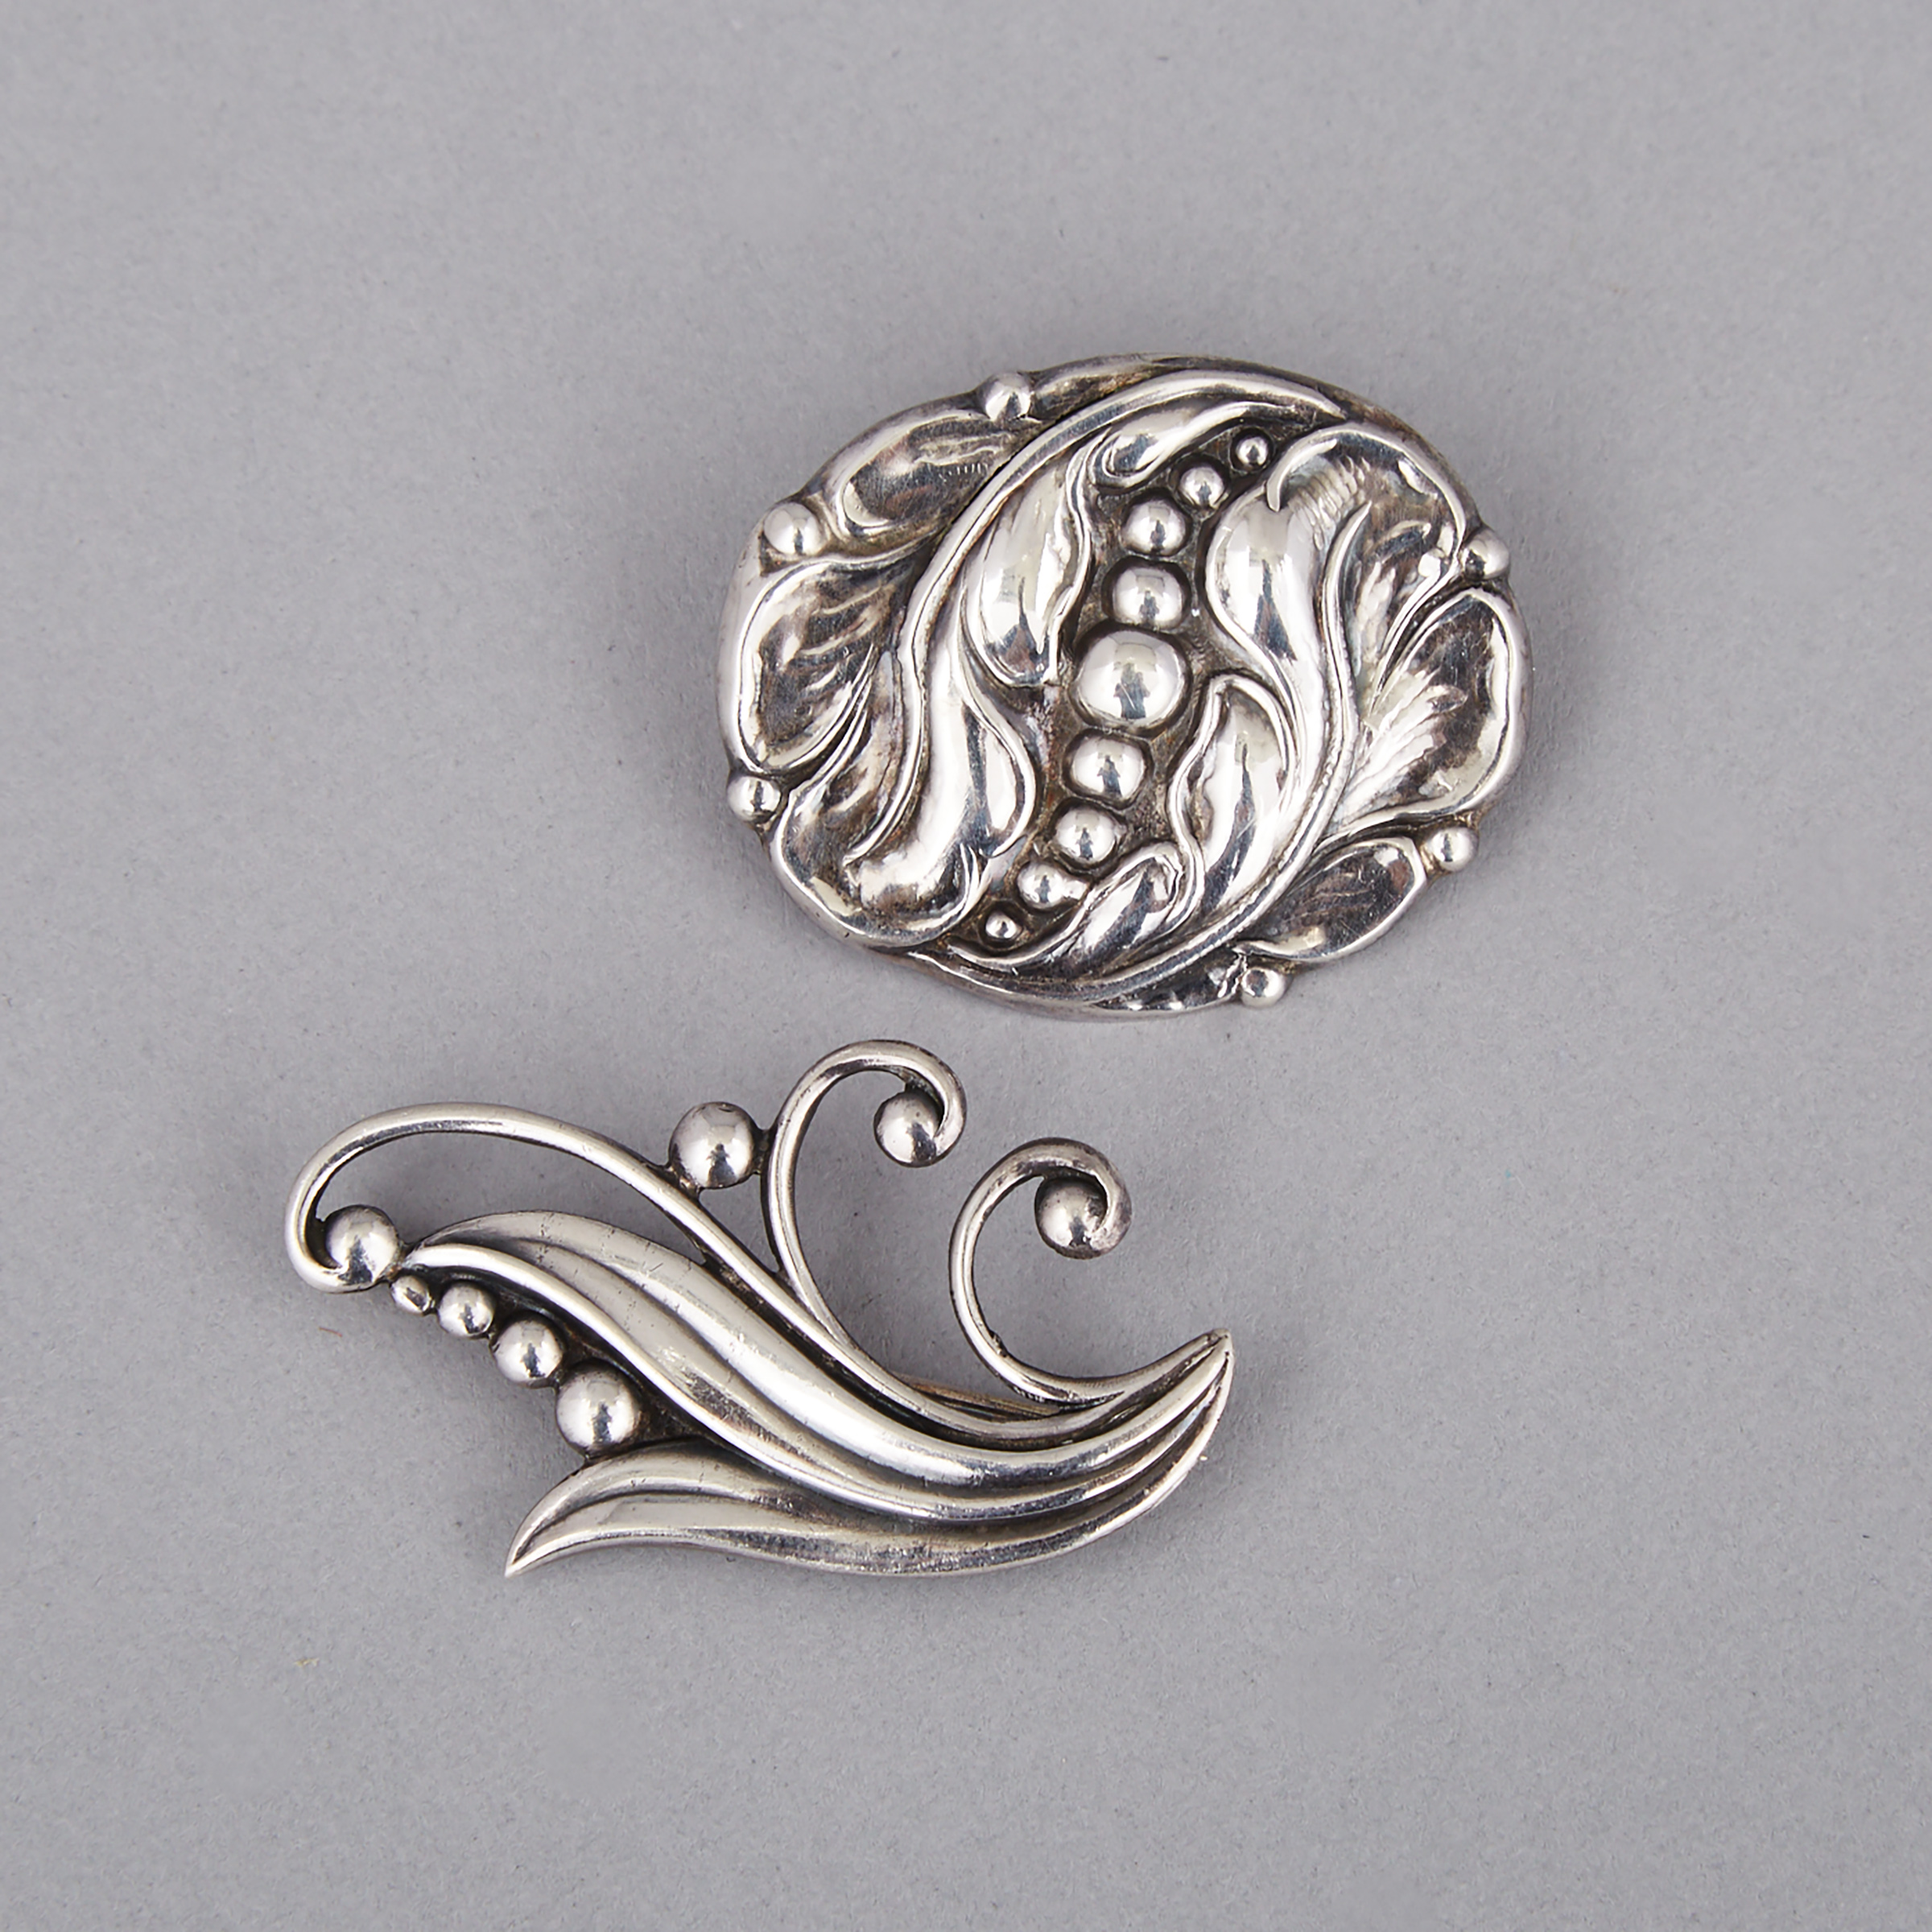 Two Canadian Silver Brooches, Carl Poul Petersen, Montreal, Que., mid-20th century